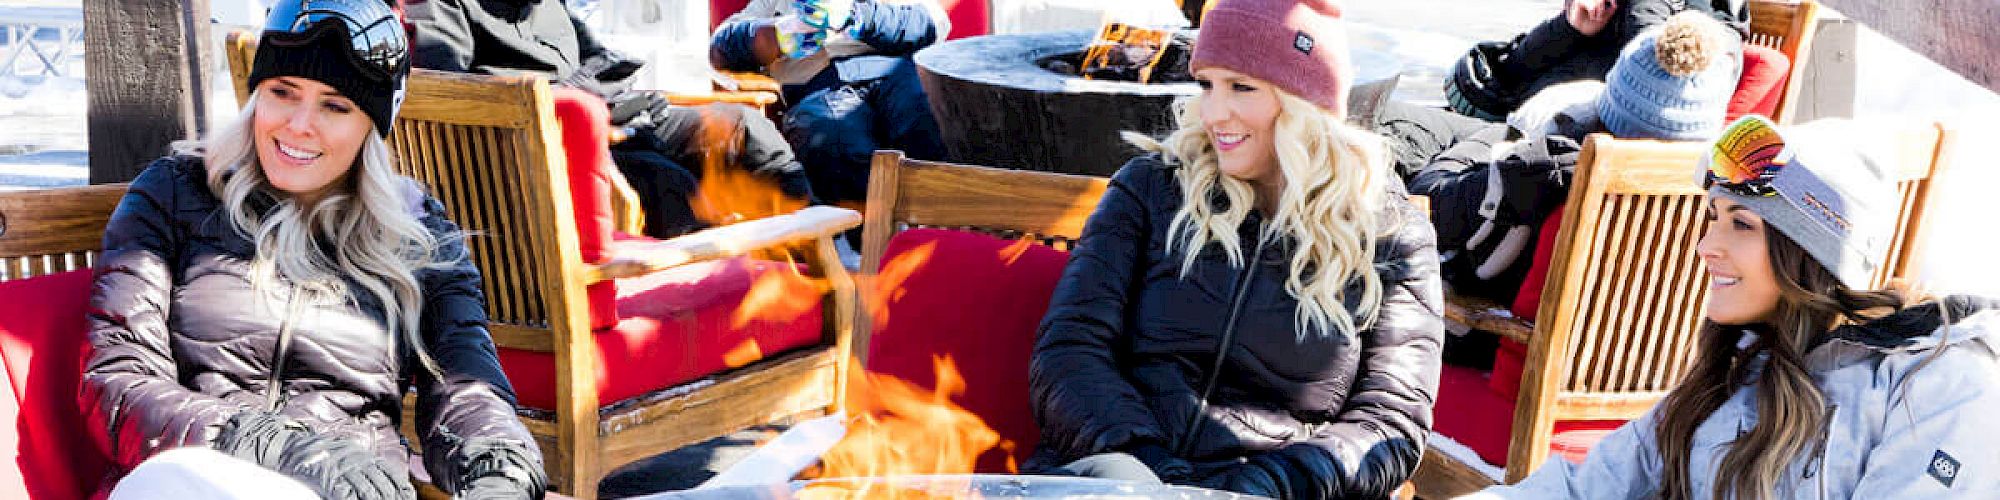 People dressed in winter gear are seated around an outdoor firepit, with a truck in the background. They look to be enjoying their time.